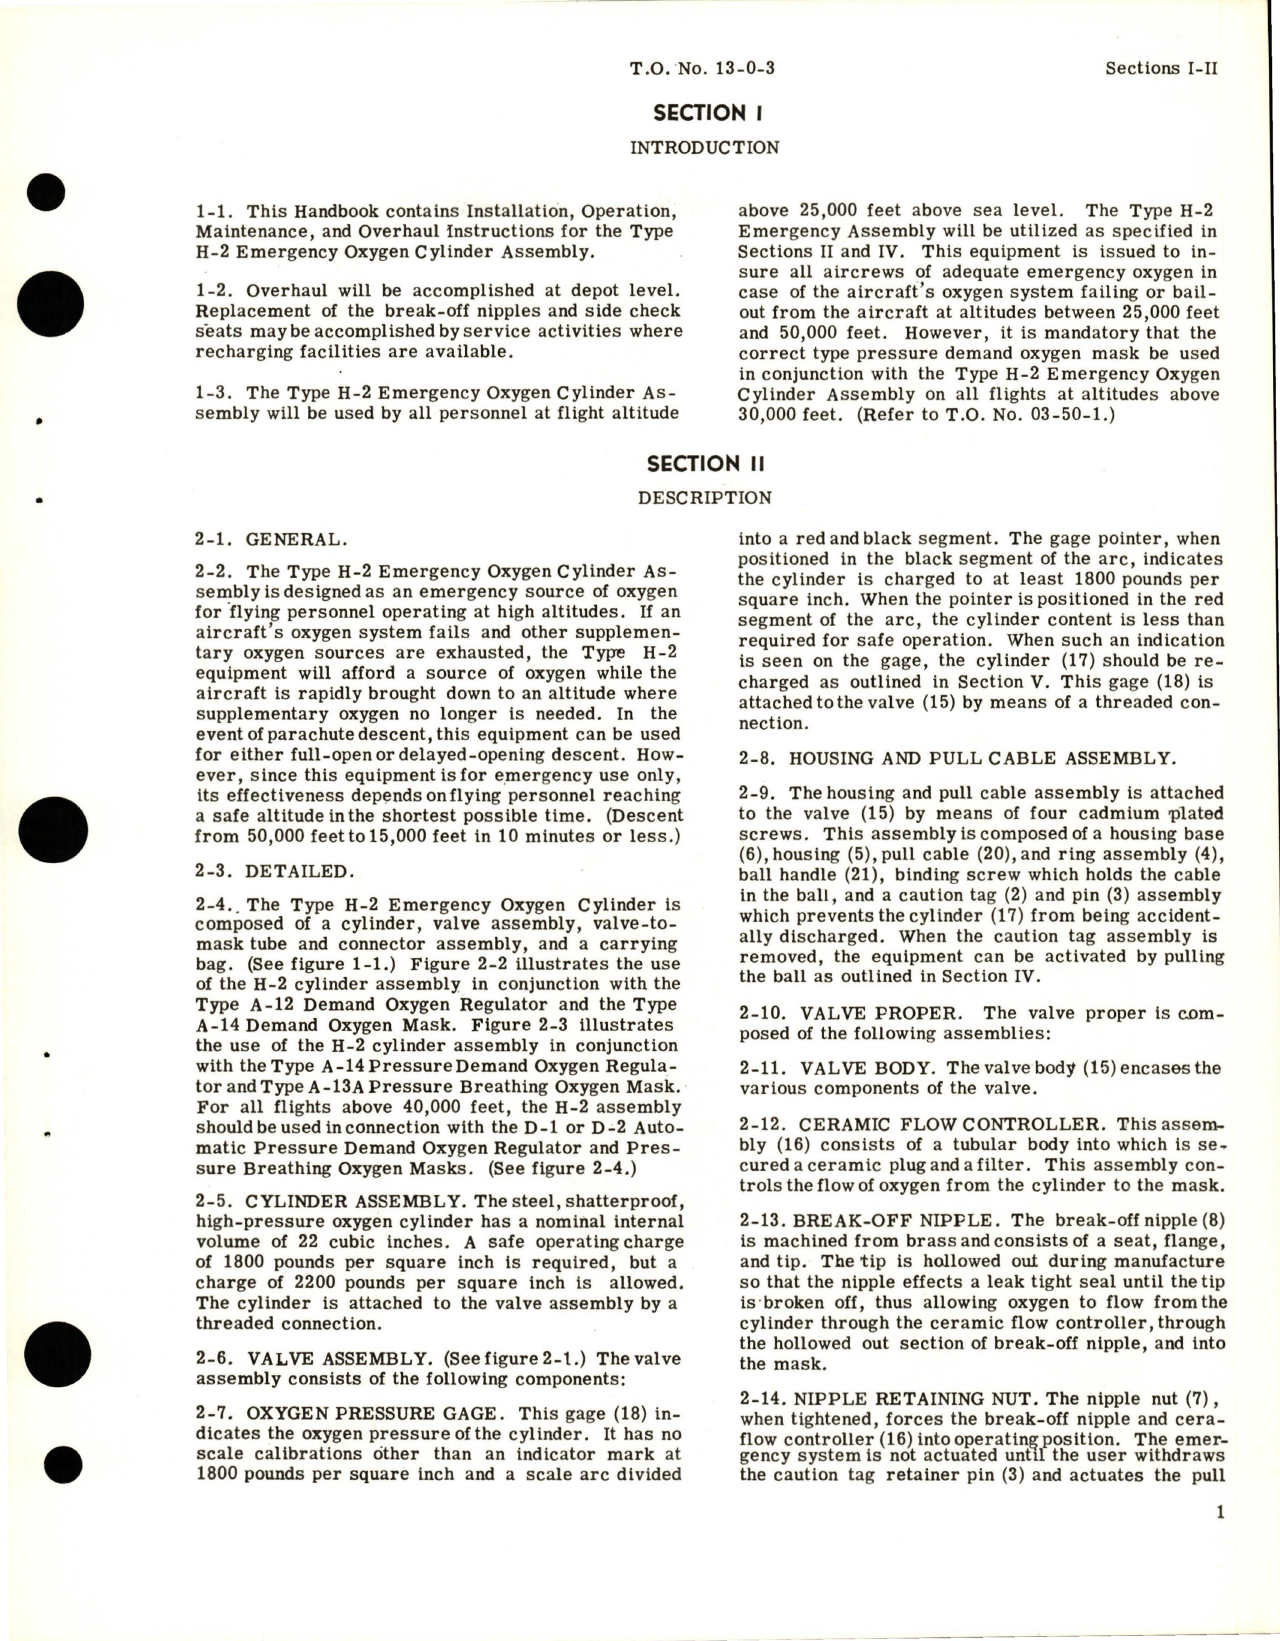 Sample page 5 from AirCorps Library document: Operation, Service, and Overhaul Instructions for Emergency Bail-Out Oxygen Cylinder - Type H-2